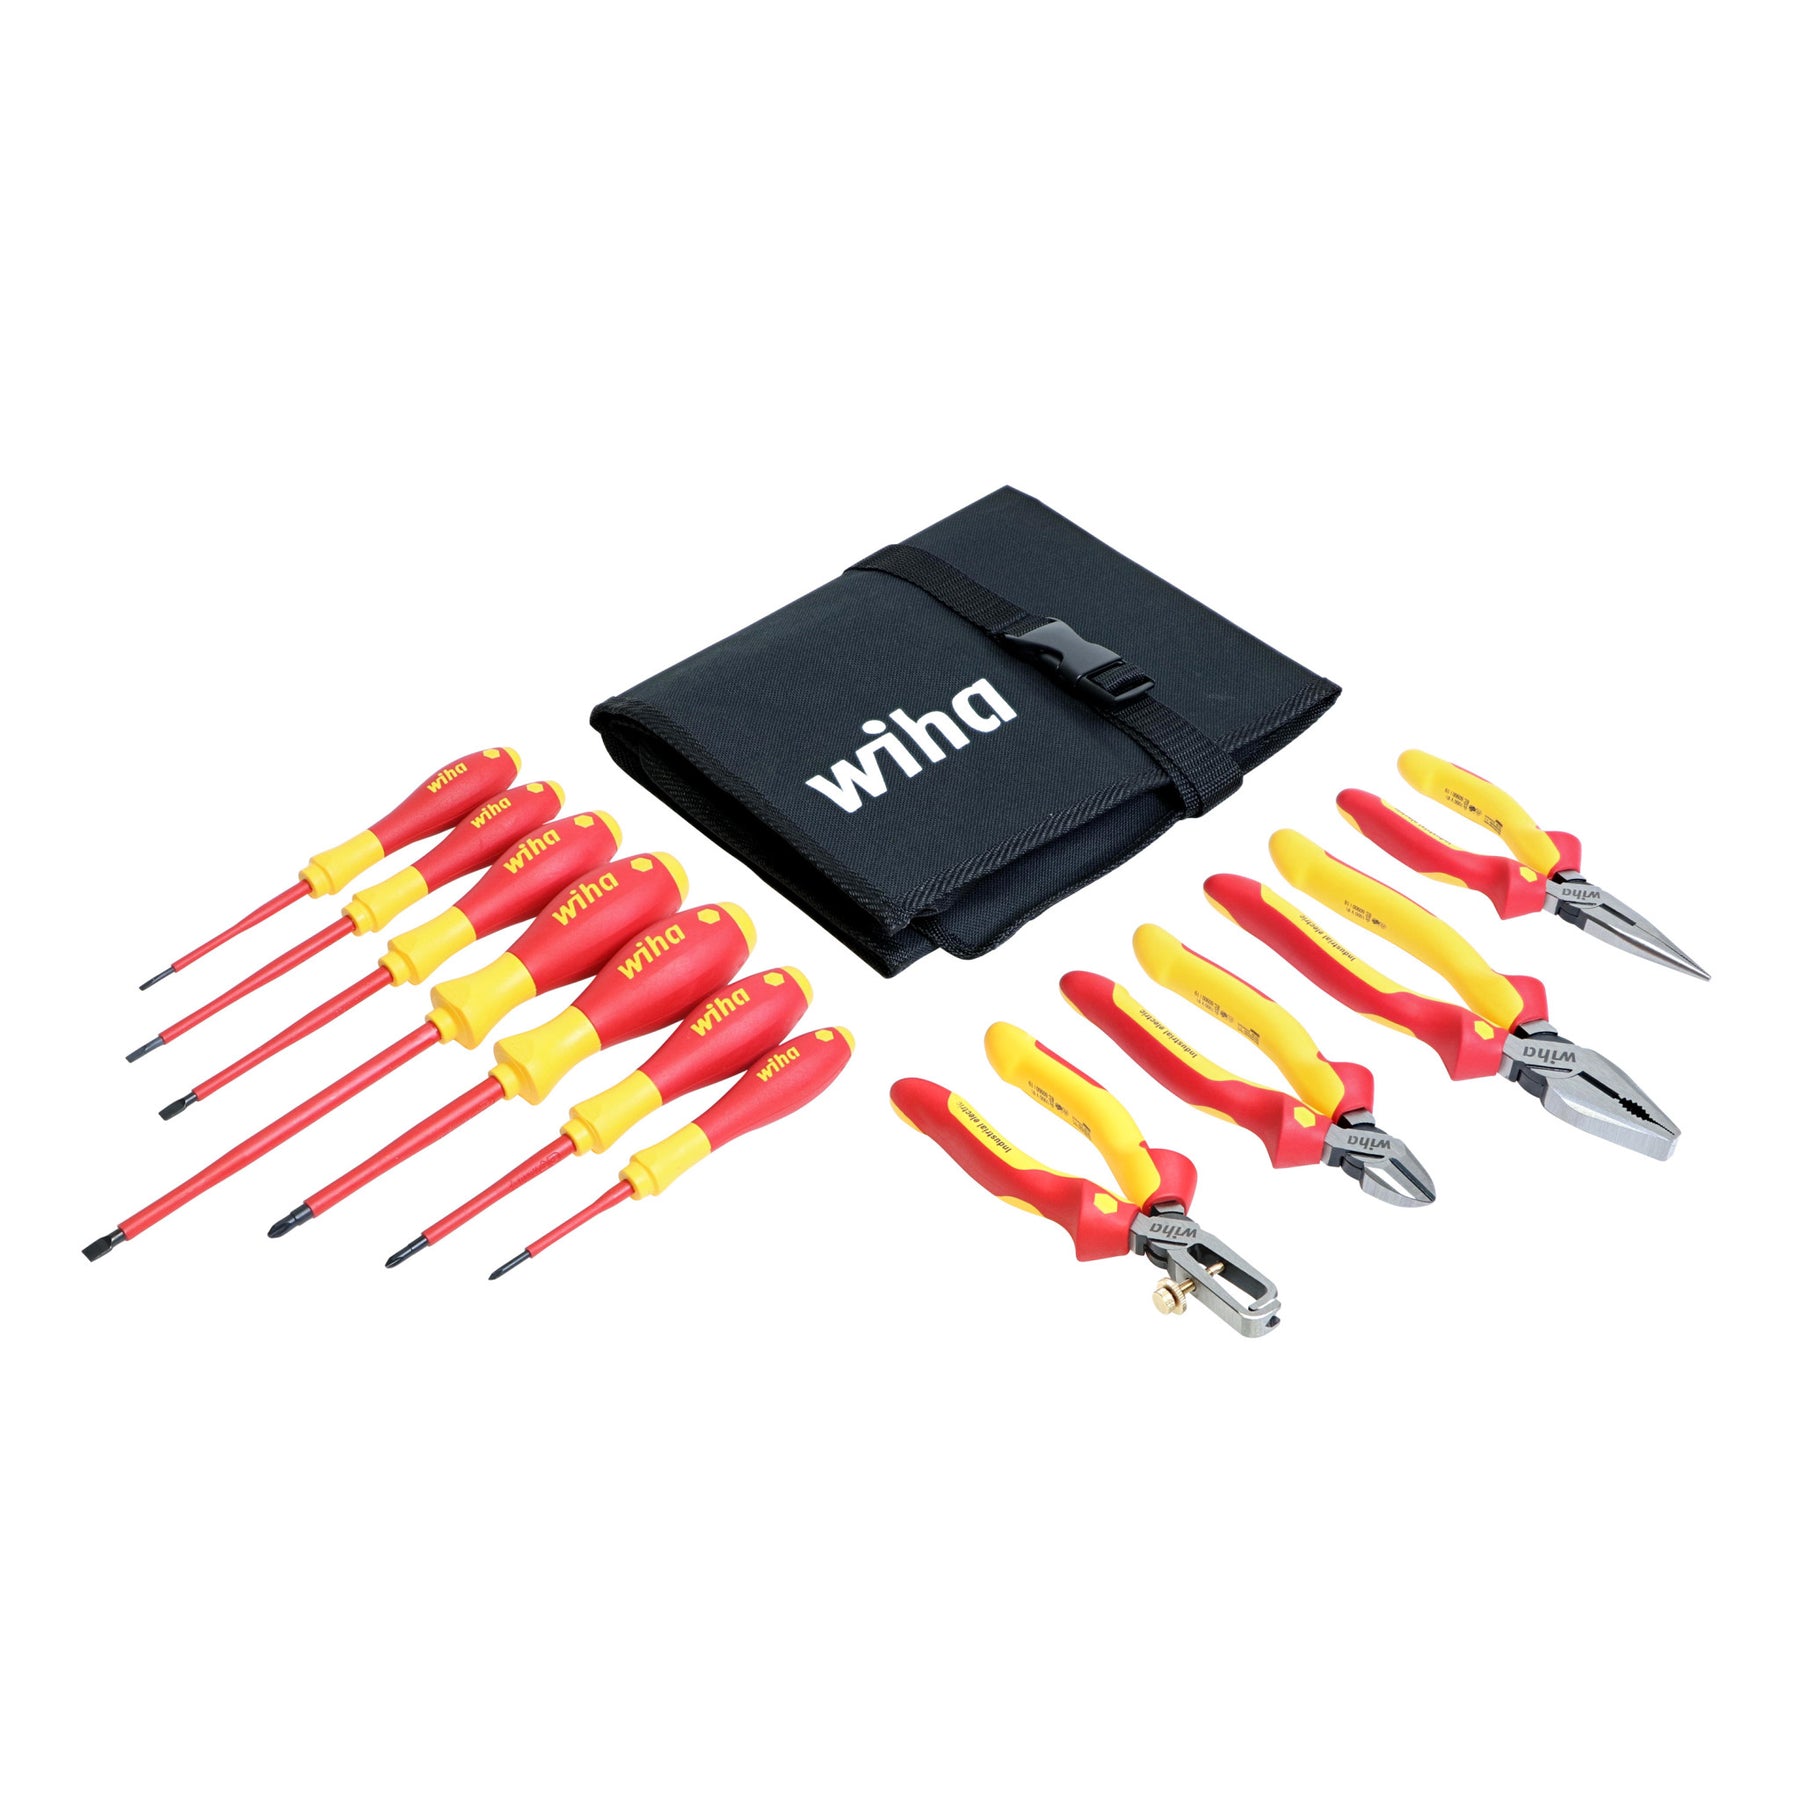 11 Piece Insulated Industrial Pliers and Screwdriver Set